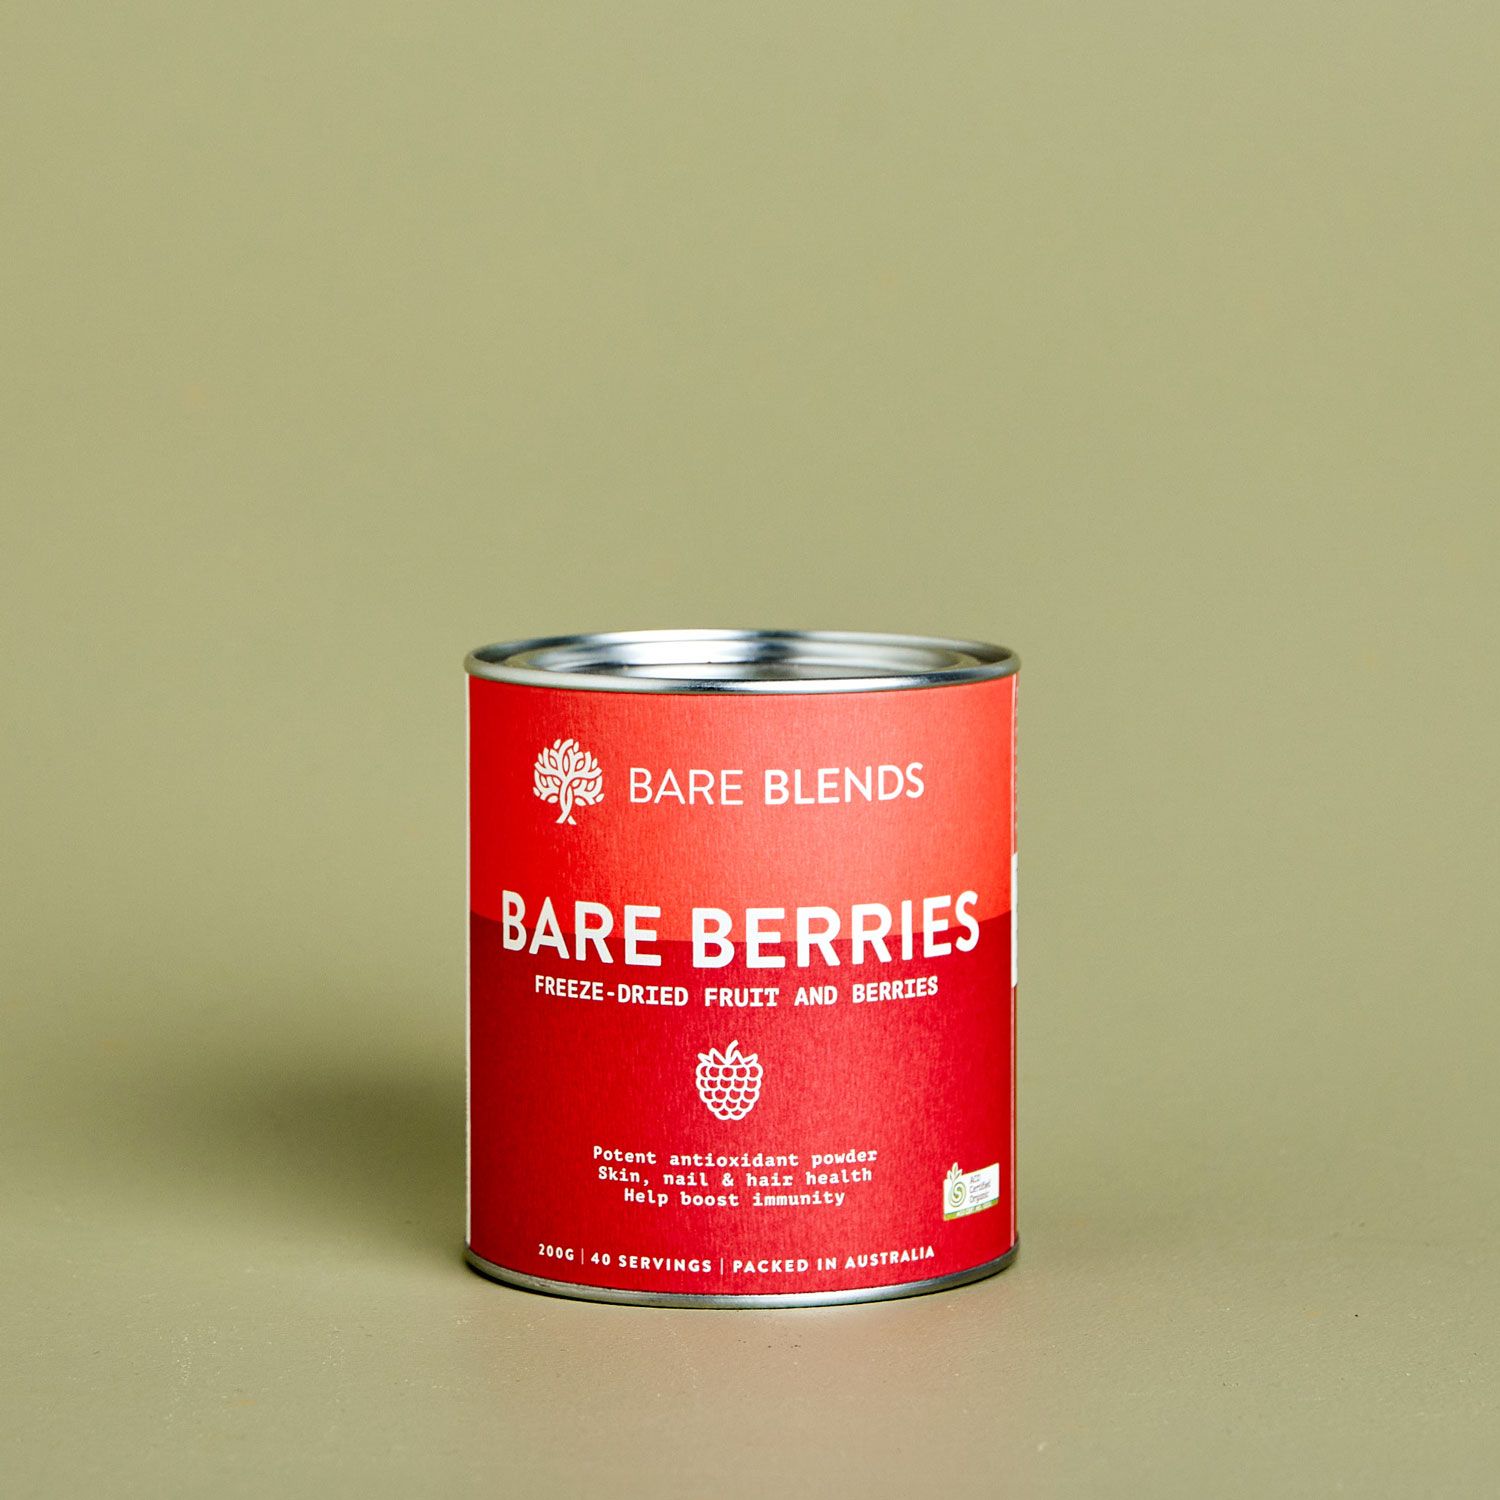 Bare Berries can